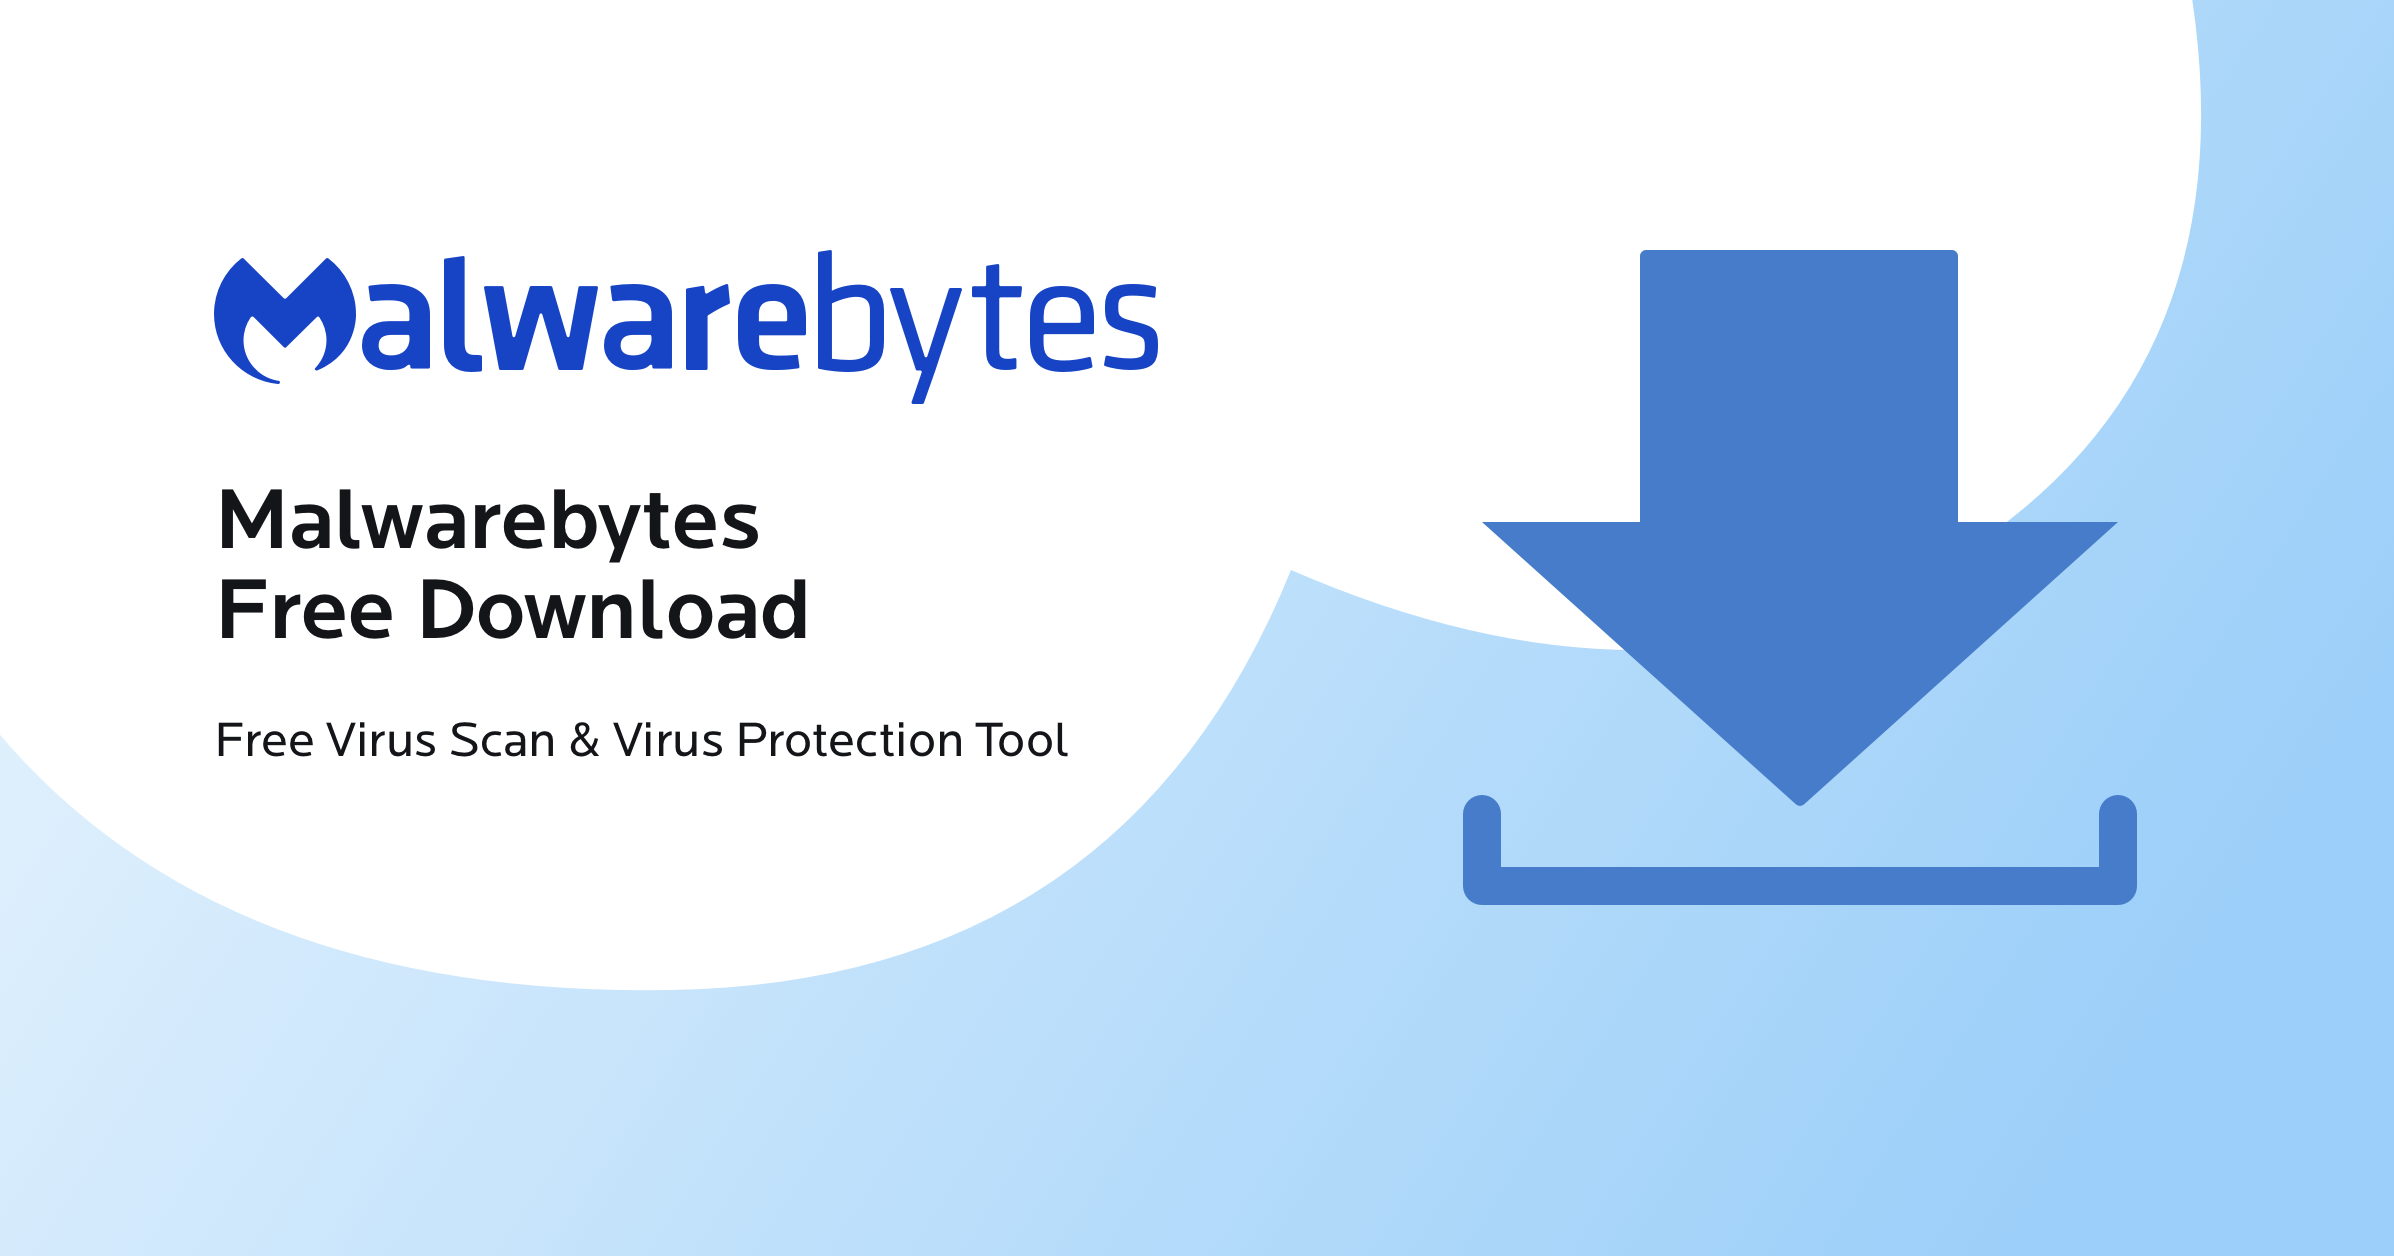 Download and install a reputable anti-malware program.
Run a full system scan to detect and remove any malware on your computer.